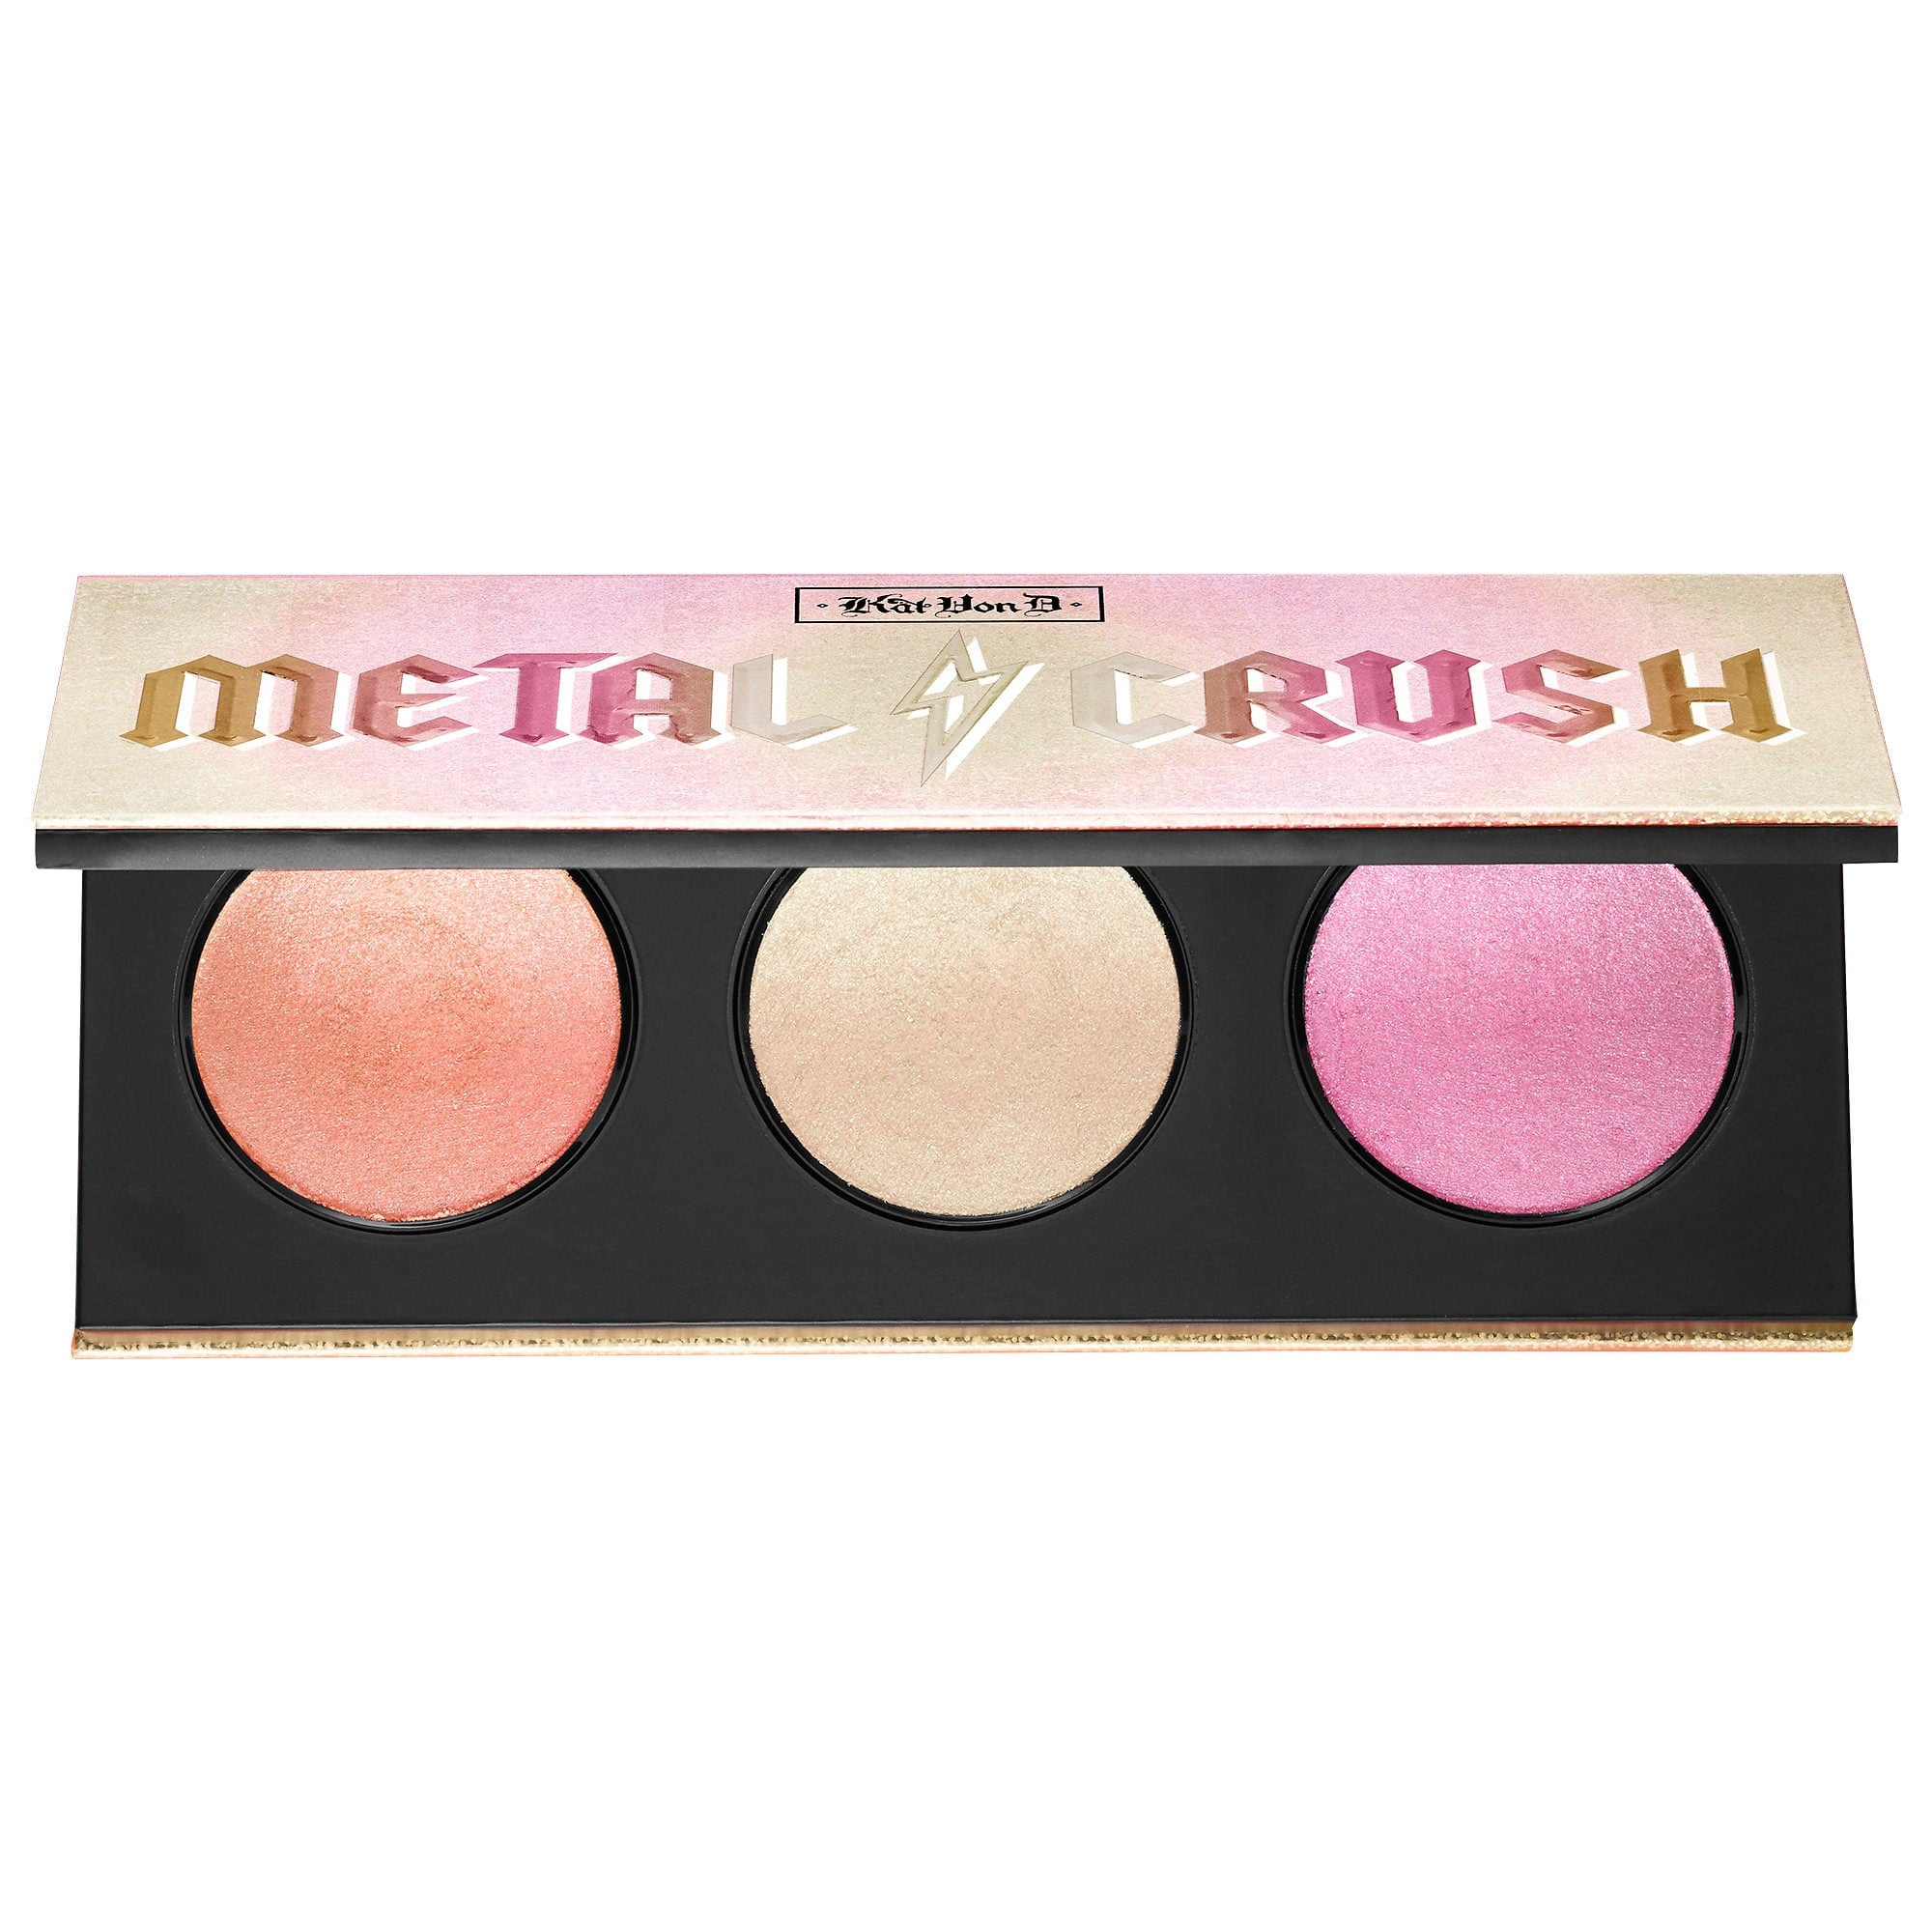 Kat Von D Metal Crush Extreme Highlighter Palette | Sephora is Practically Giving Away These 6 Palettes This Week | POPSUGAR Beauty 2